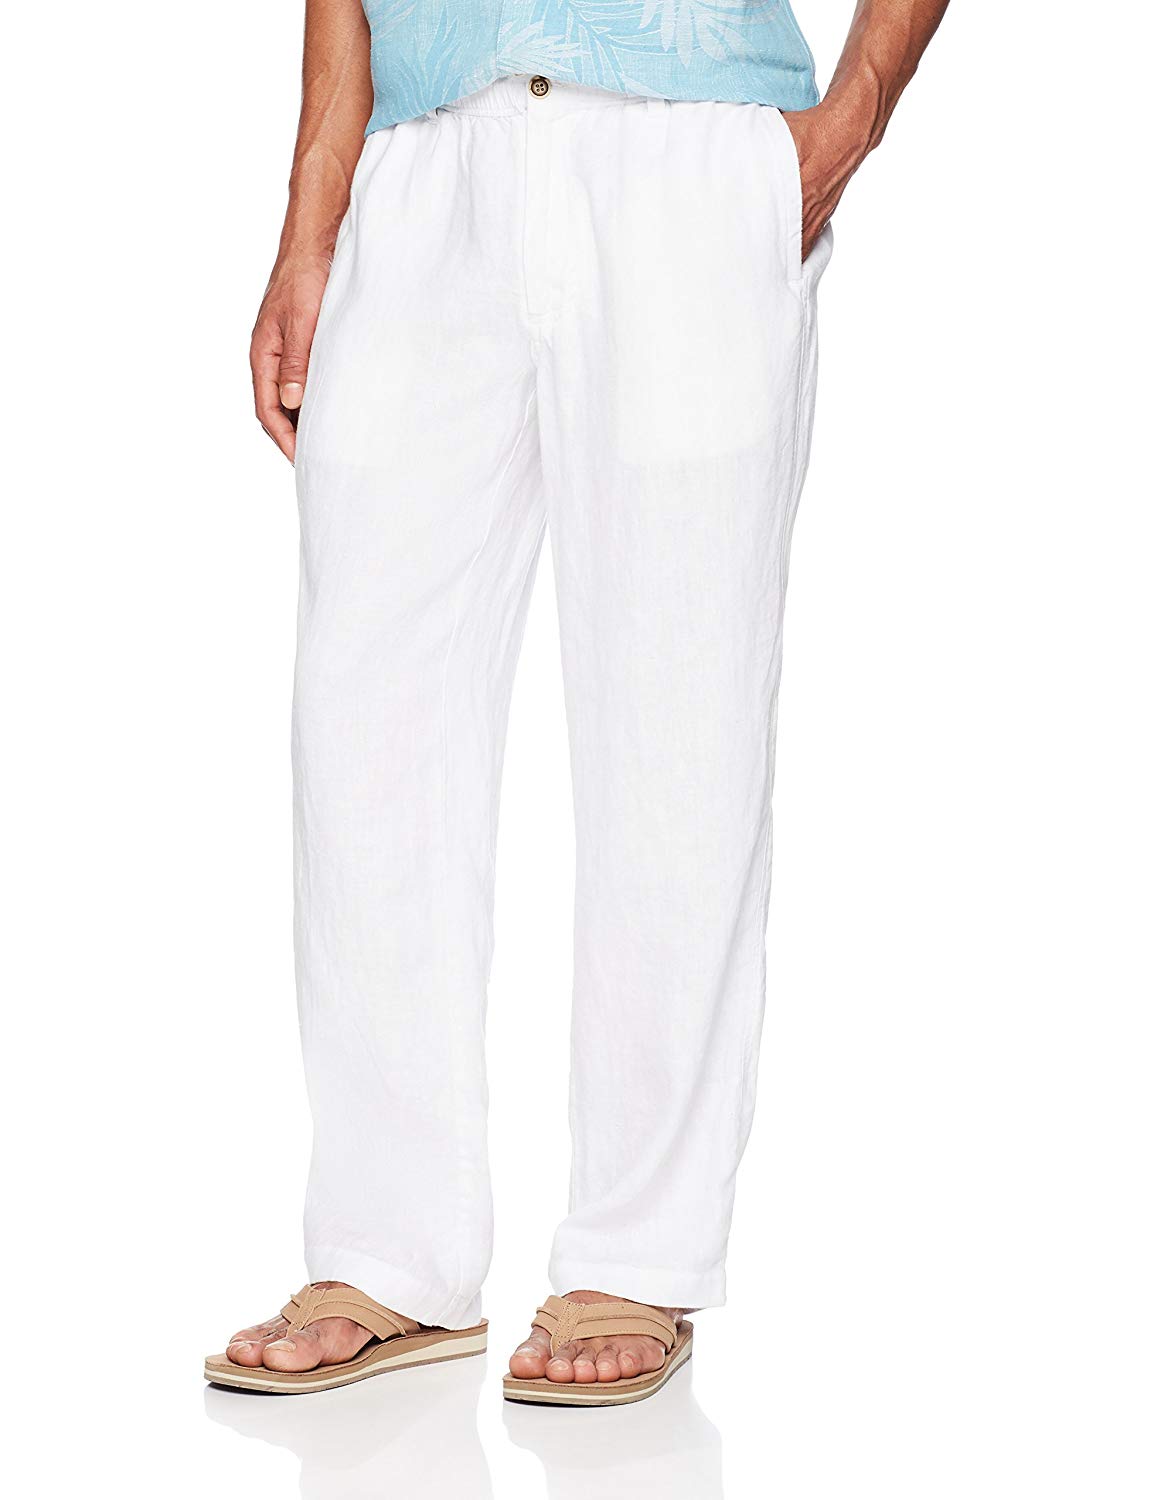 28 Palms Men's Relaxed-Fit Linen Pant, Bright White, Size X-Large/32 ...